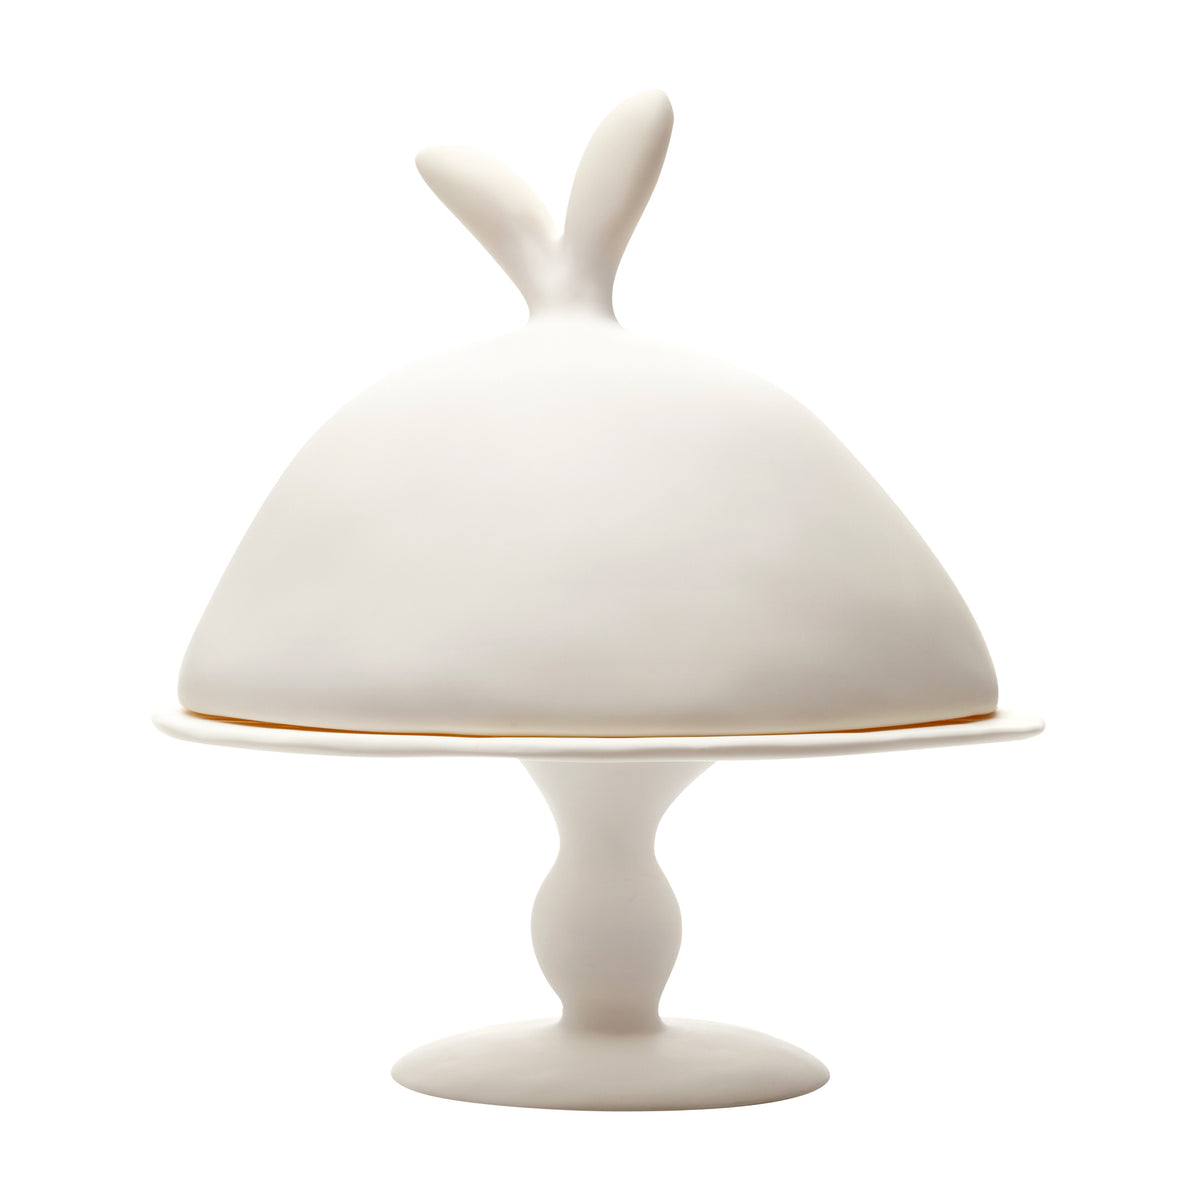 Bunny Ear Dome on Pedestal Stand, Large